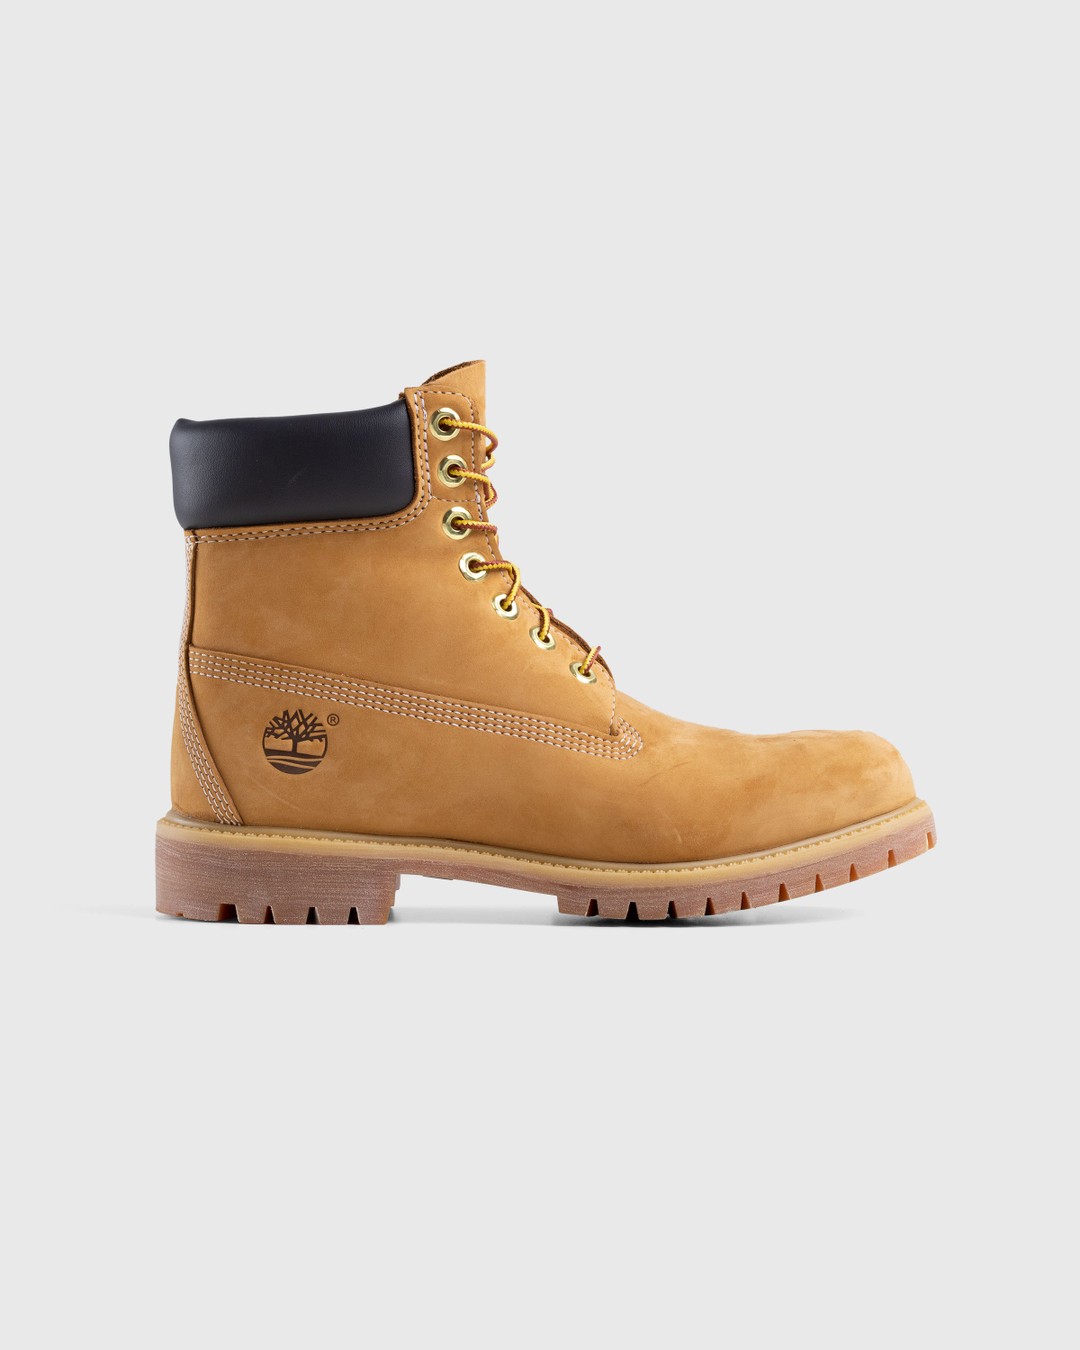 Timberland – 6 Inch Premium Boot Yellow - Laced Up Boots - Yellow - Image 1